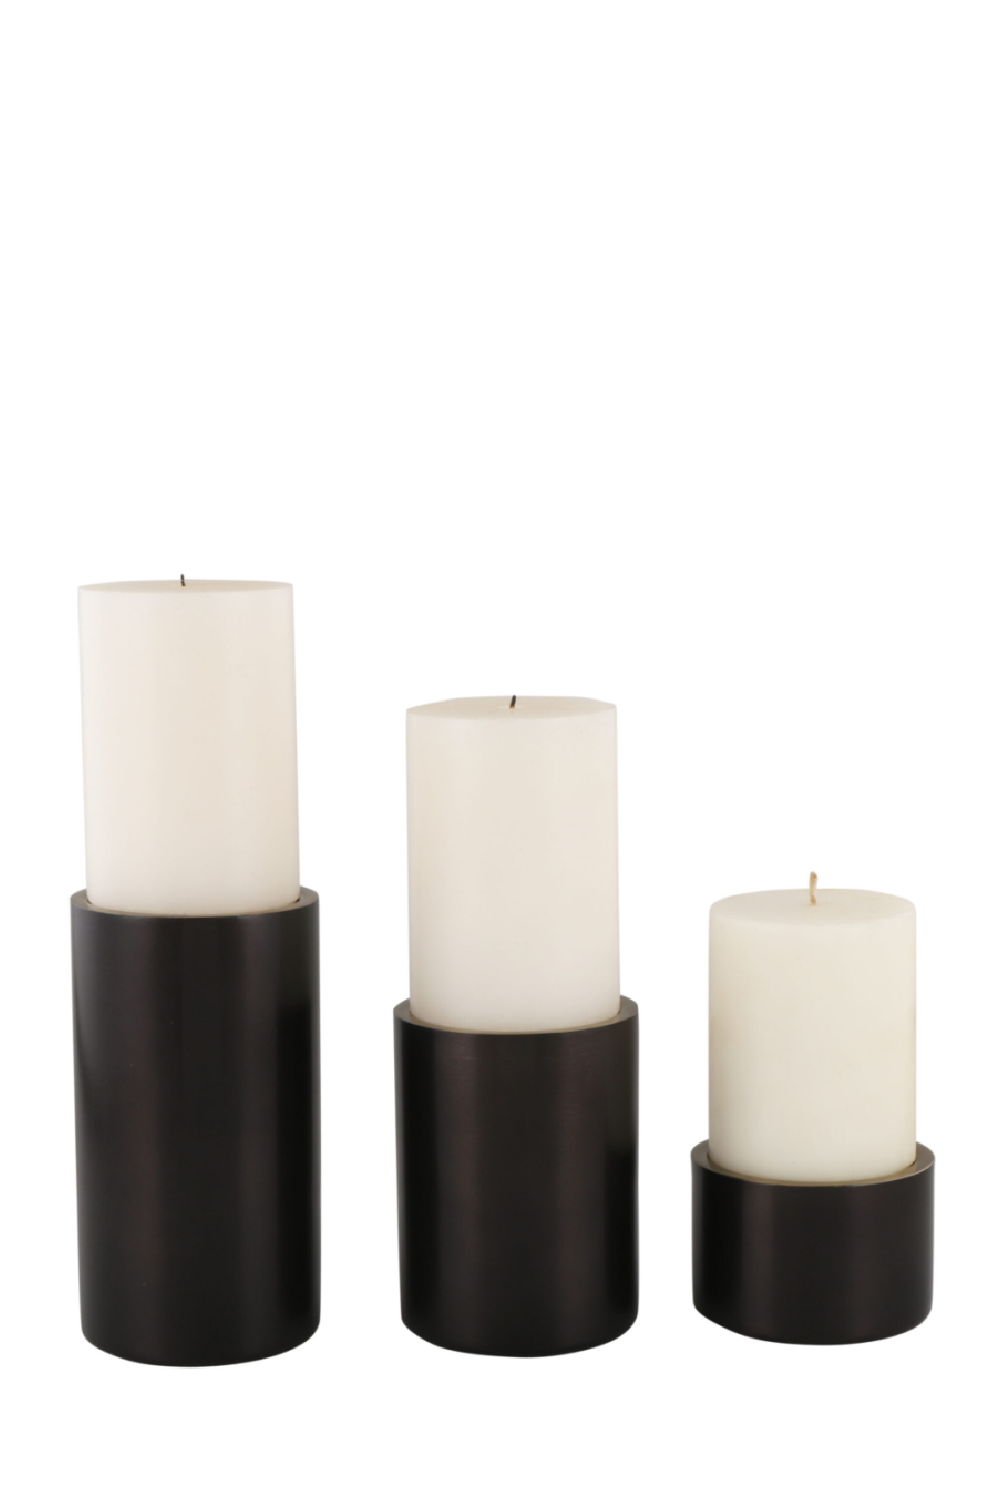 Brushed Black & Gold Metal Candle Holders Set | Liang & Eimil Curtis | Oroa.com